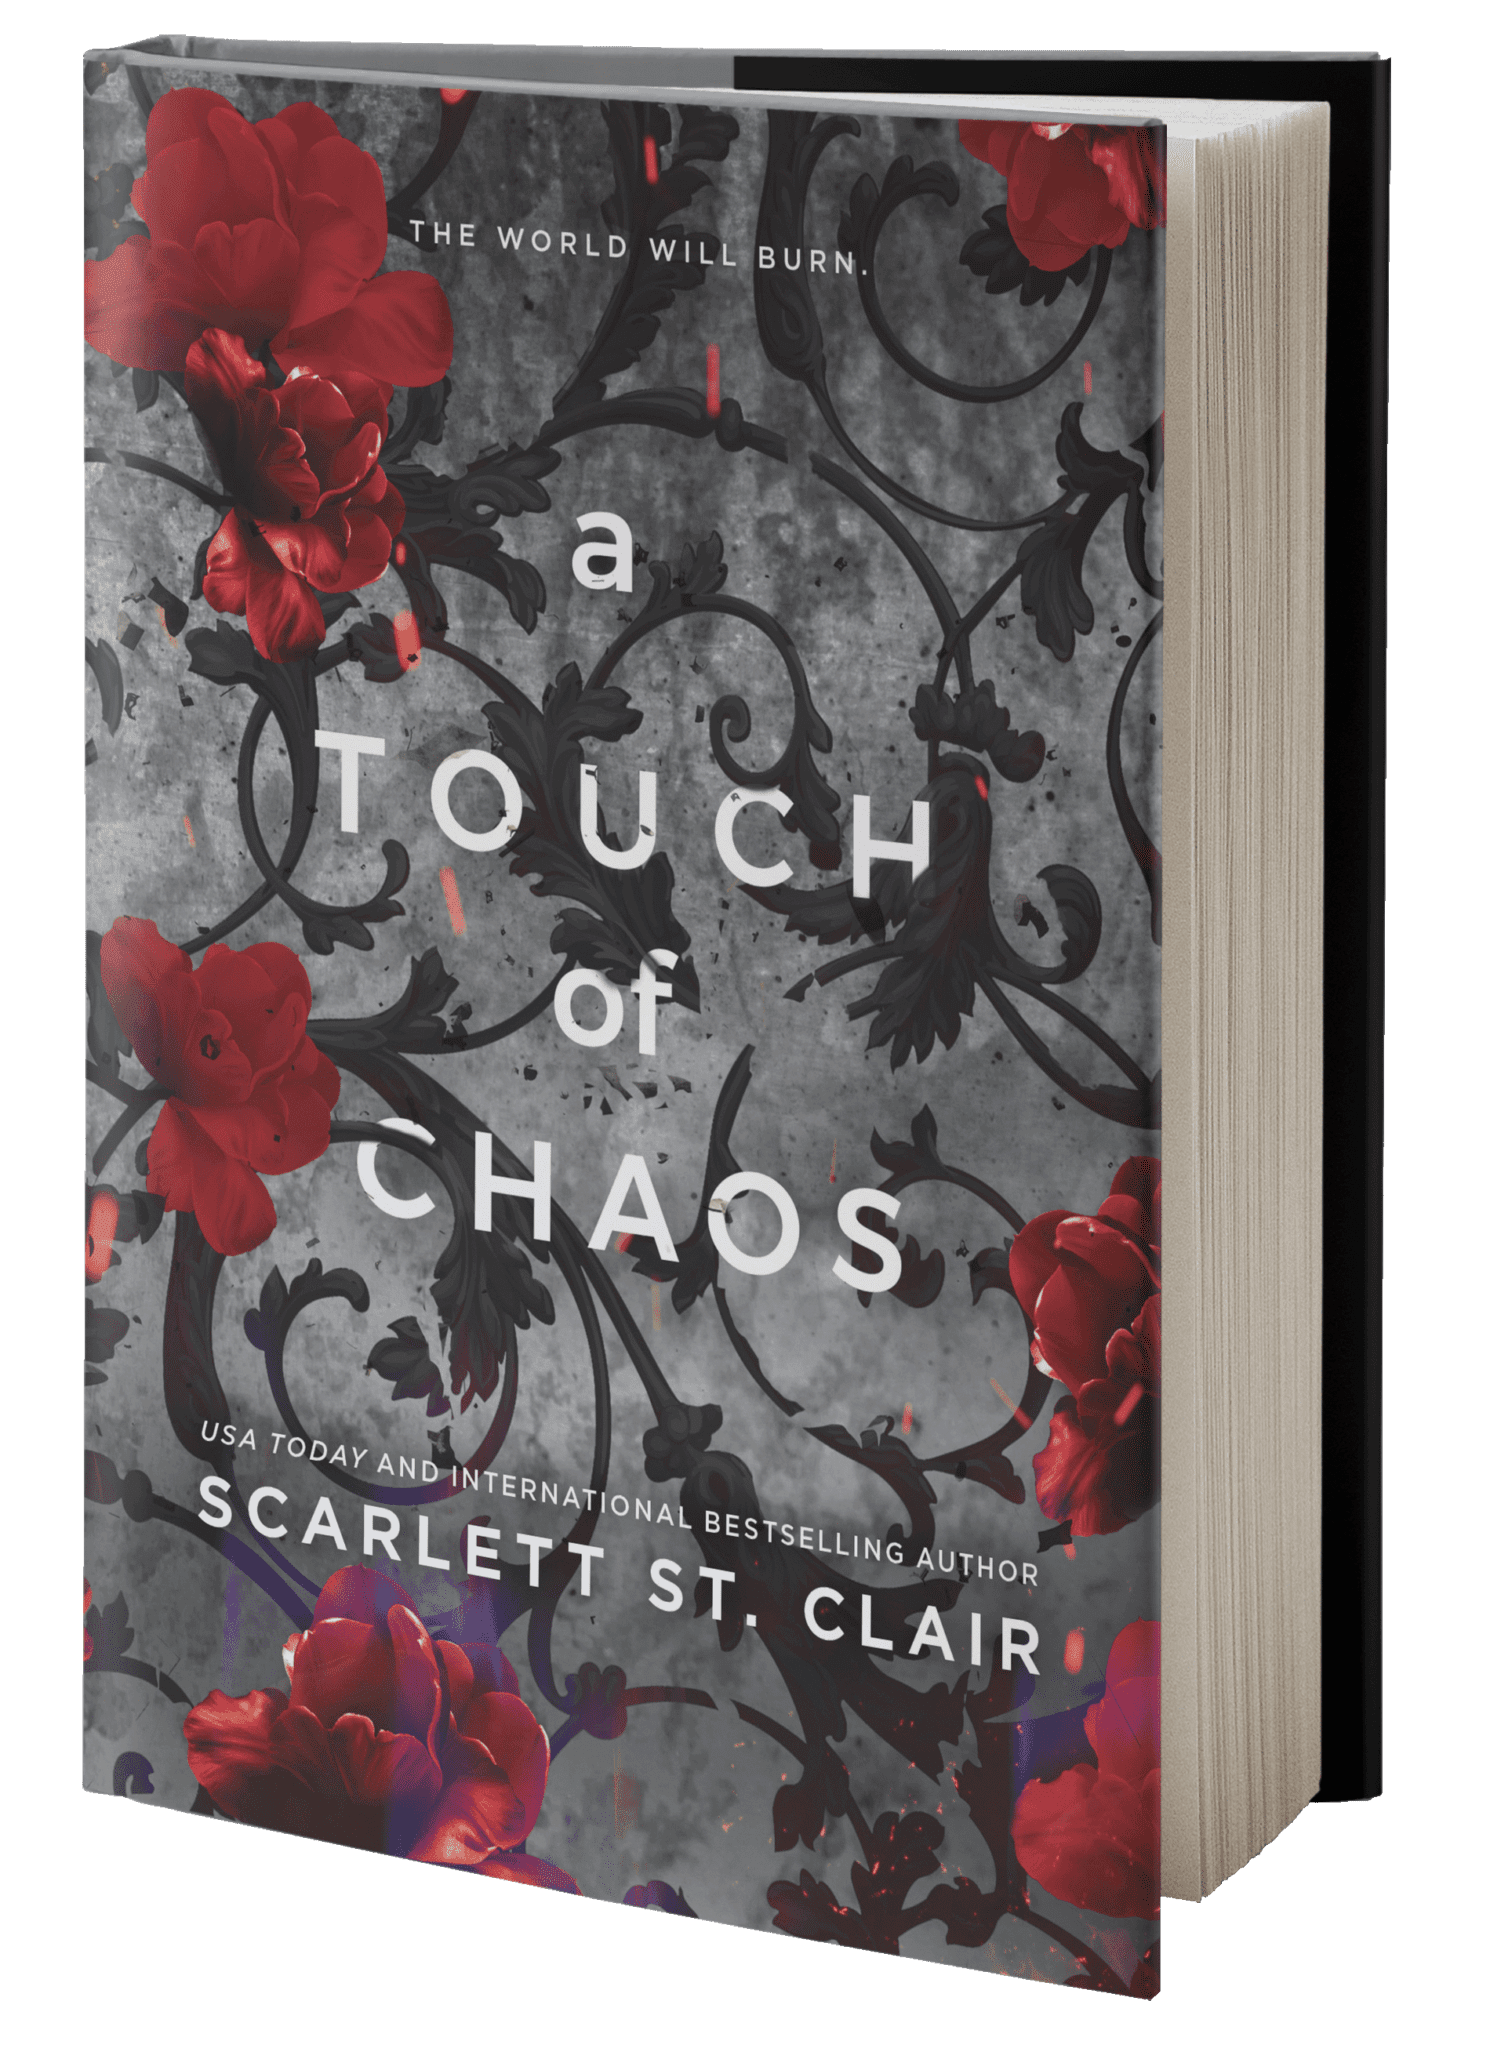 Book cover of "A Touch of Chaos"